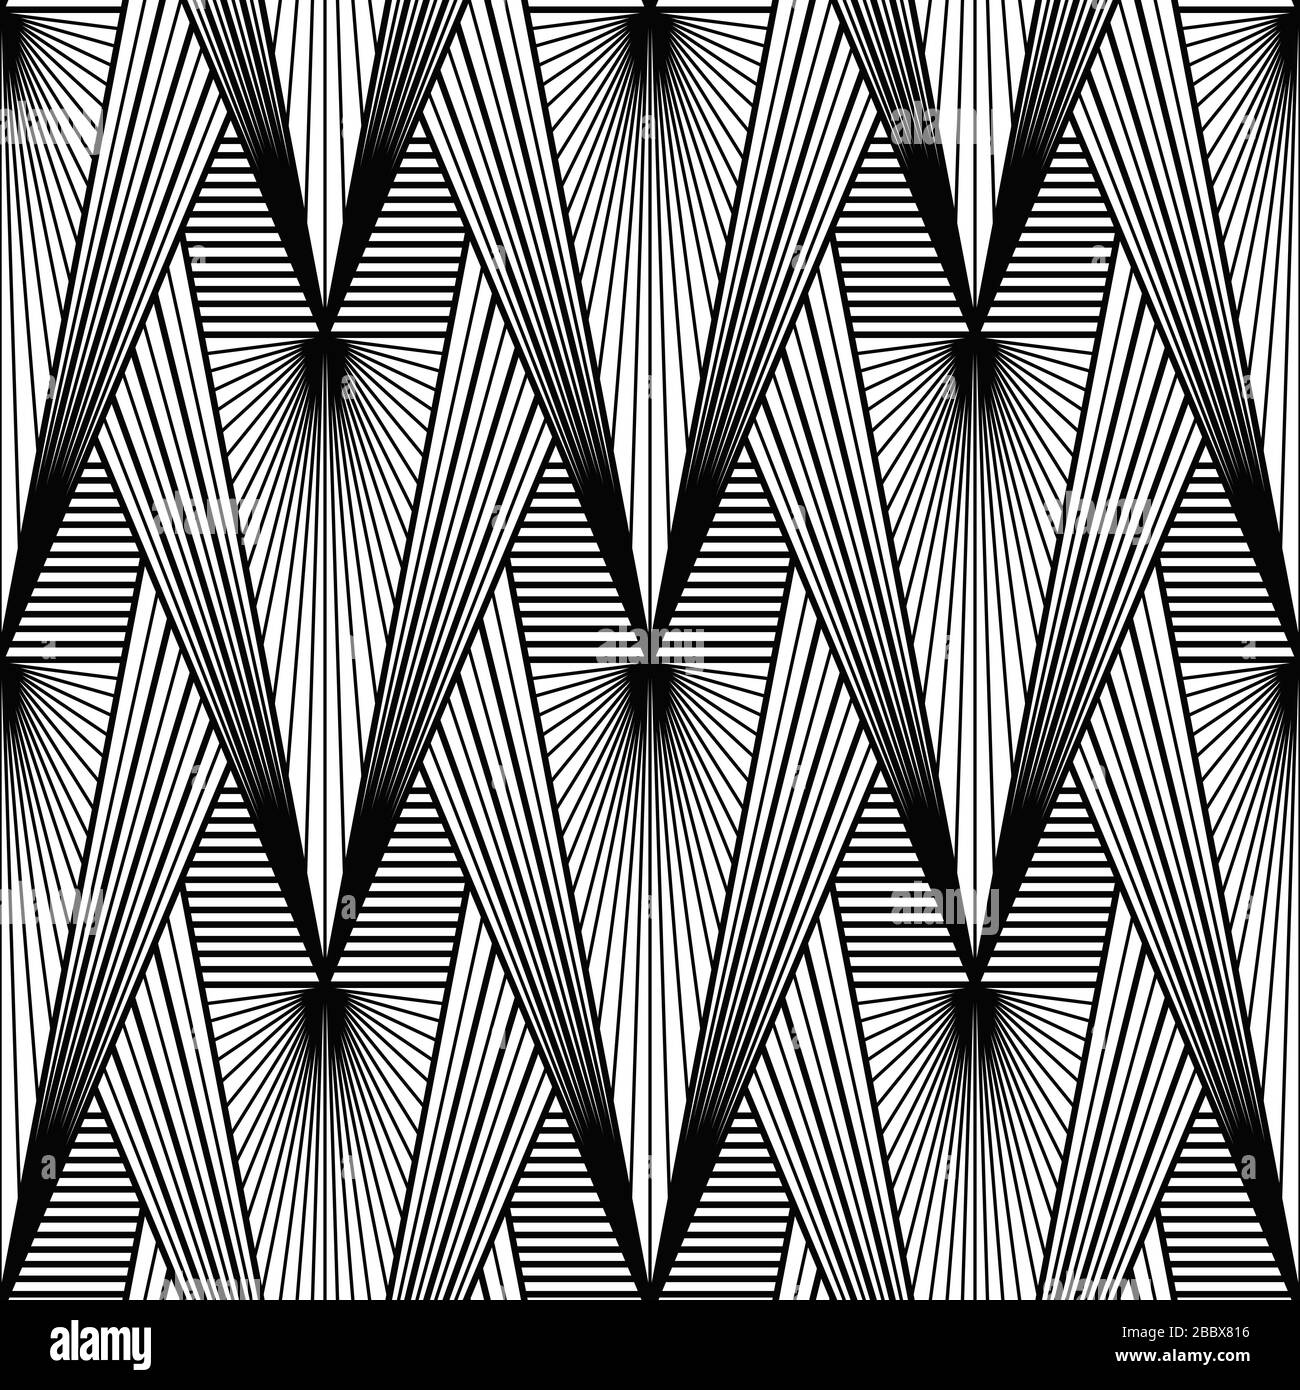 Sharp pattern Stock Vector Images - Alamy